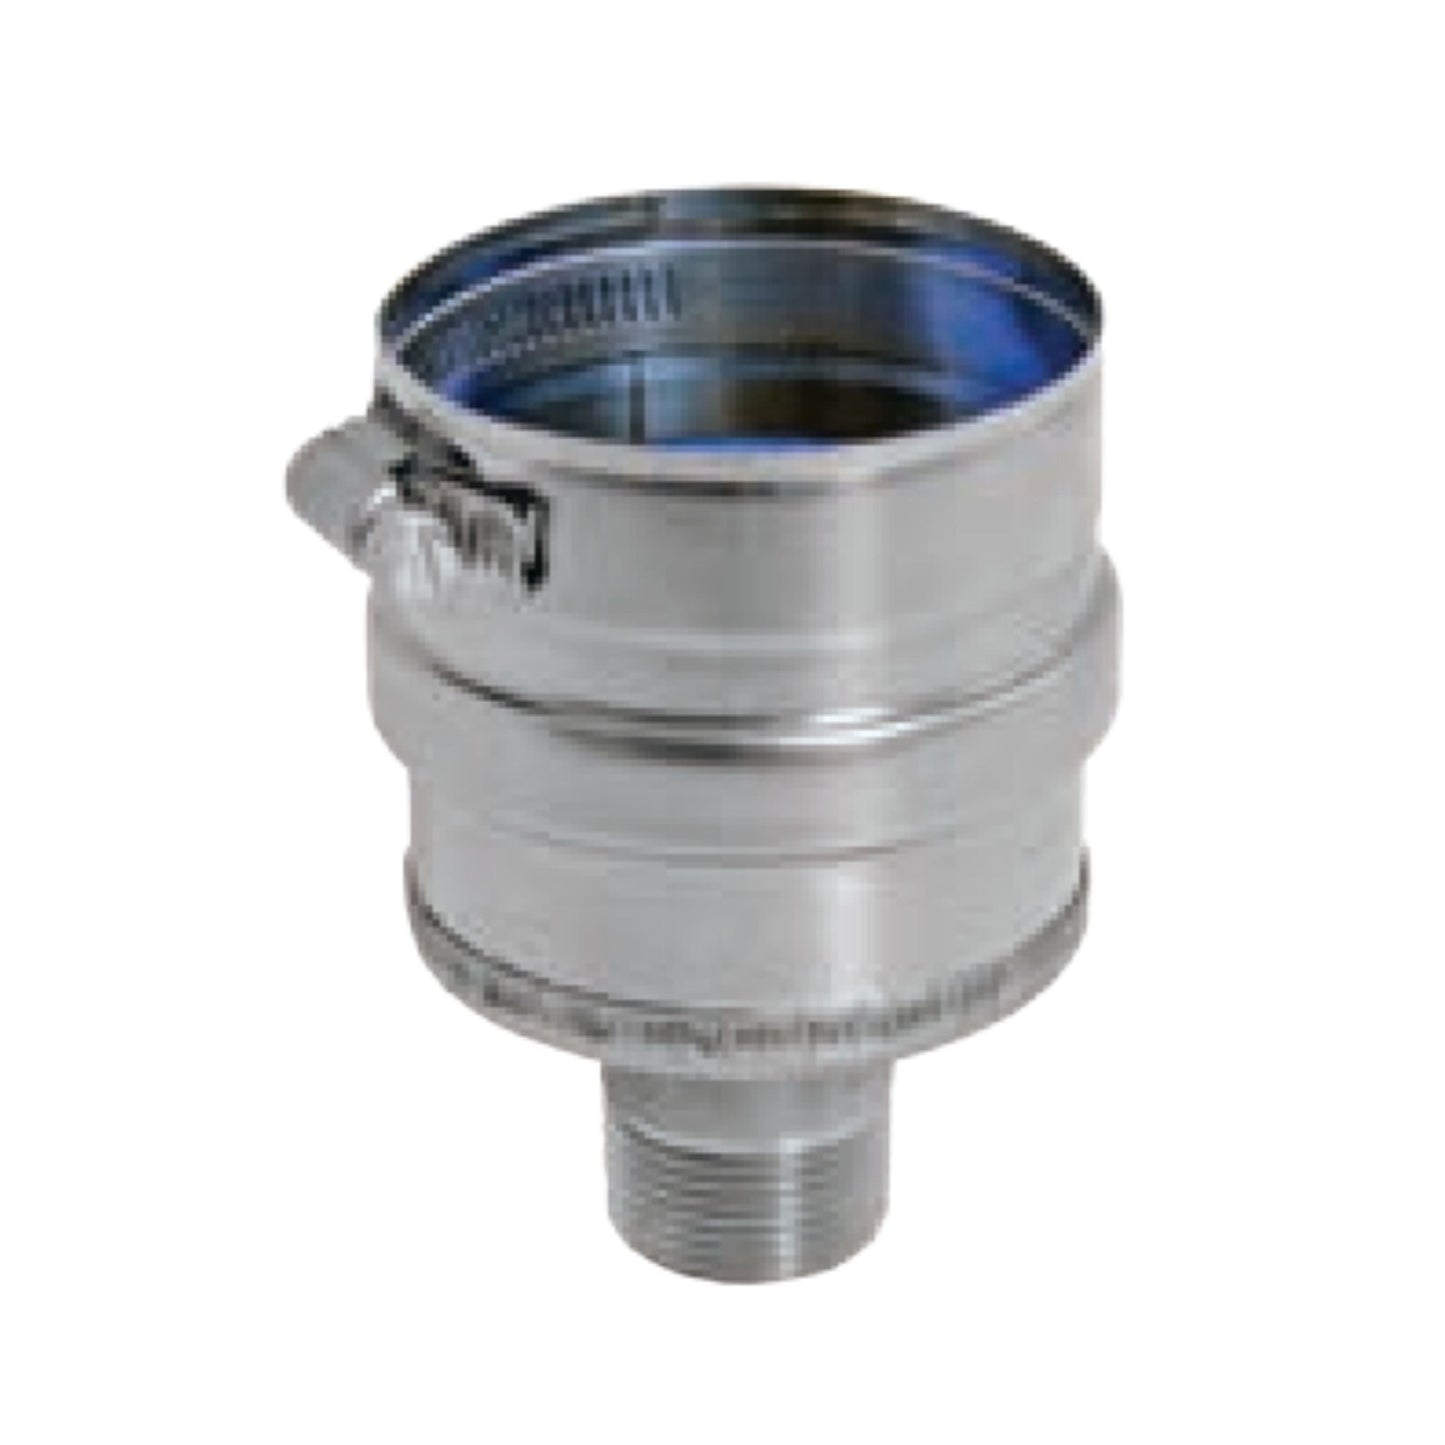 DuraVent FasNSeal 3" 316L Stainless Steel IPS Drain Fitting